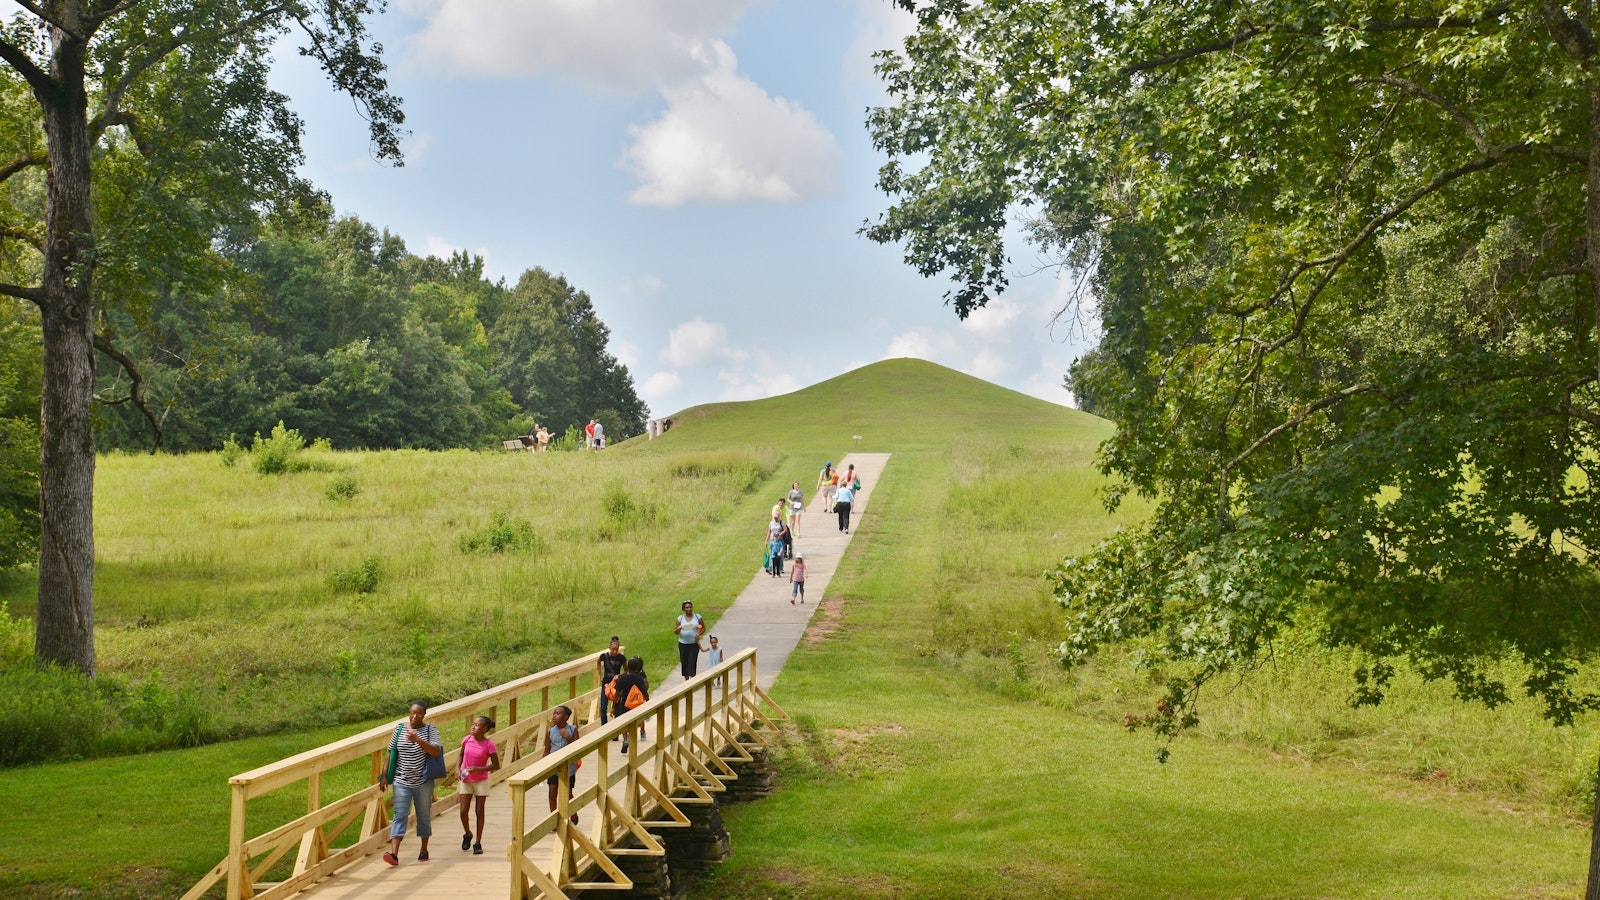 A wooden path leads upwards towards an earthern mound